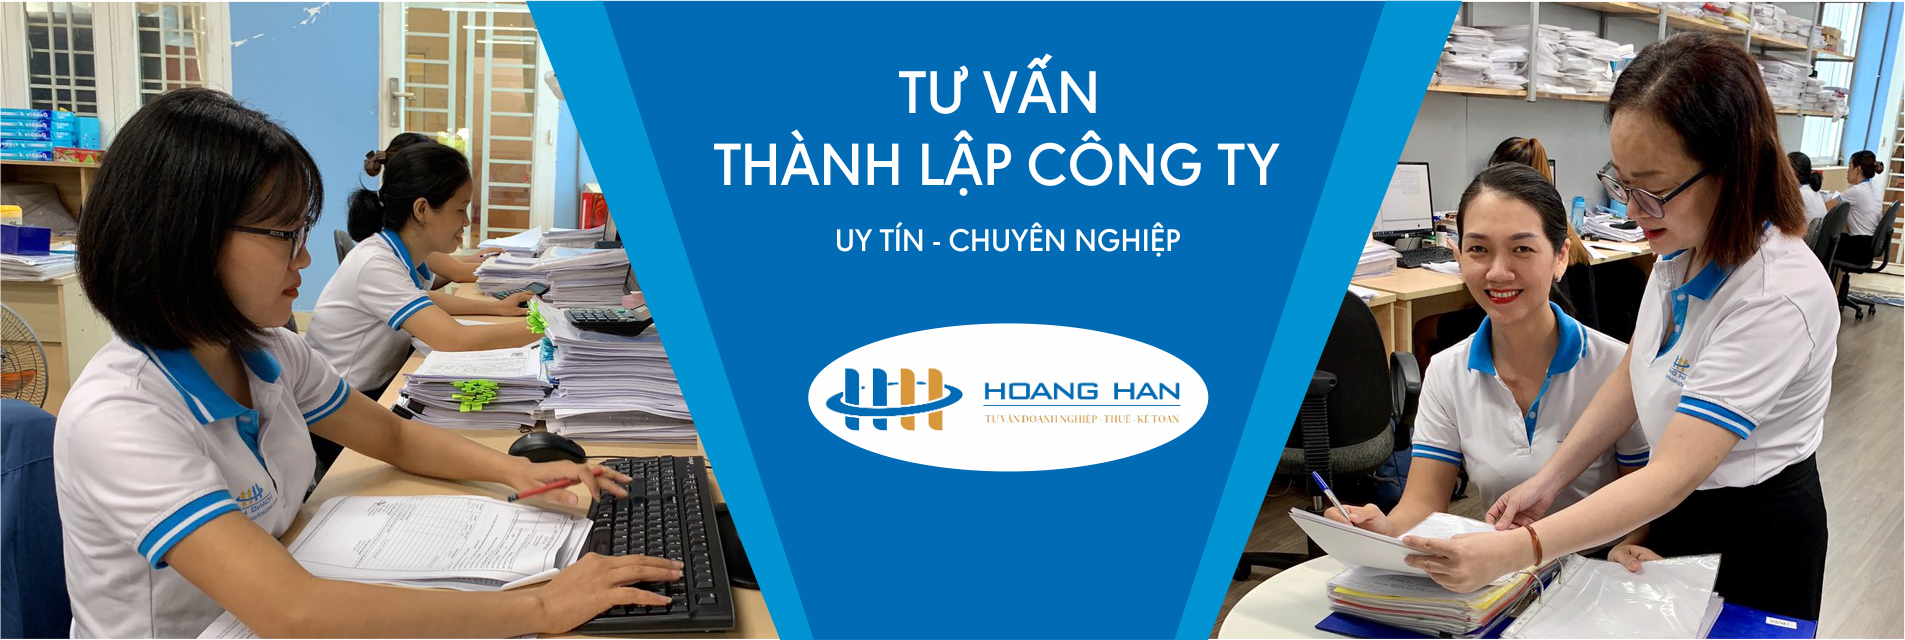 baner thanh lao cong ty